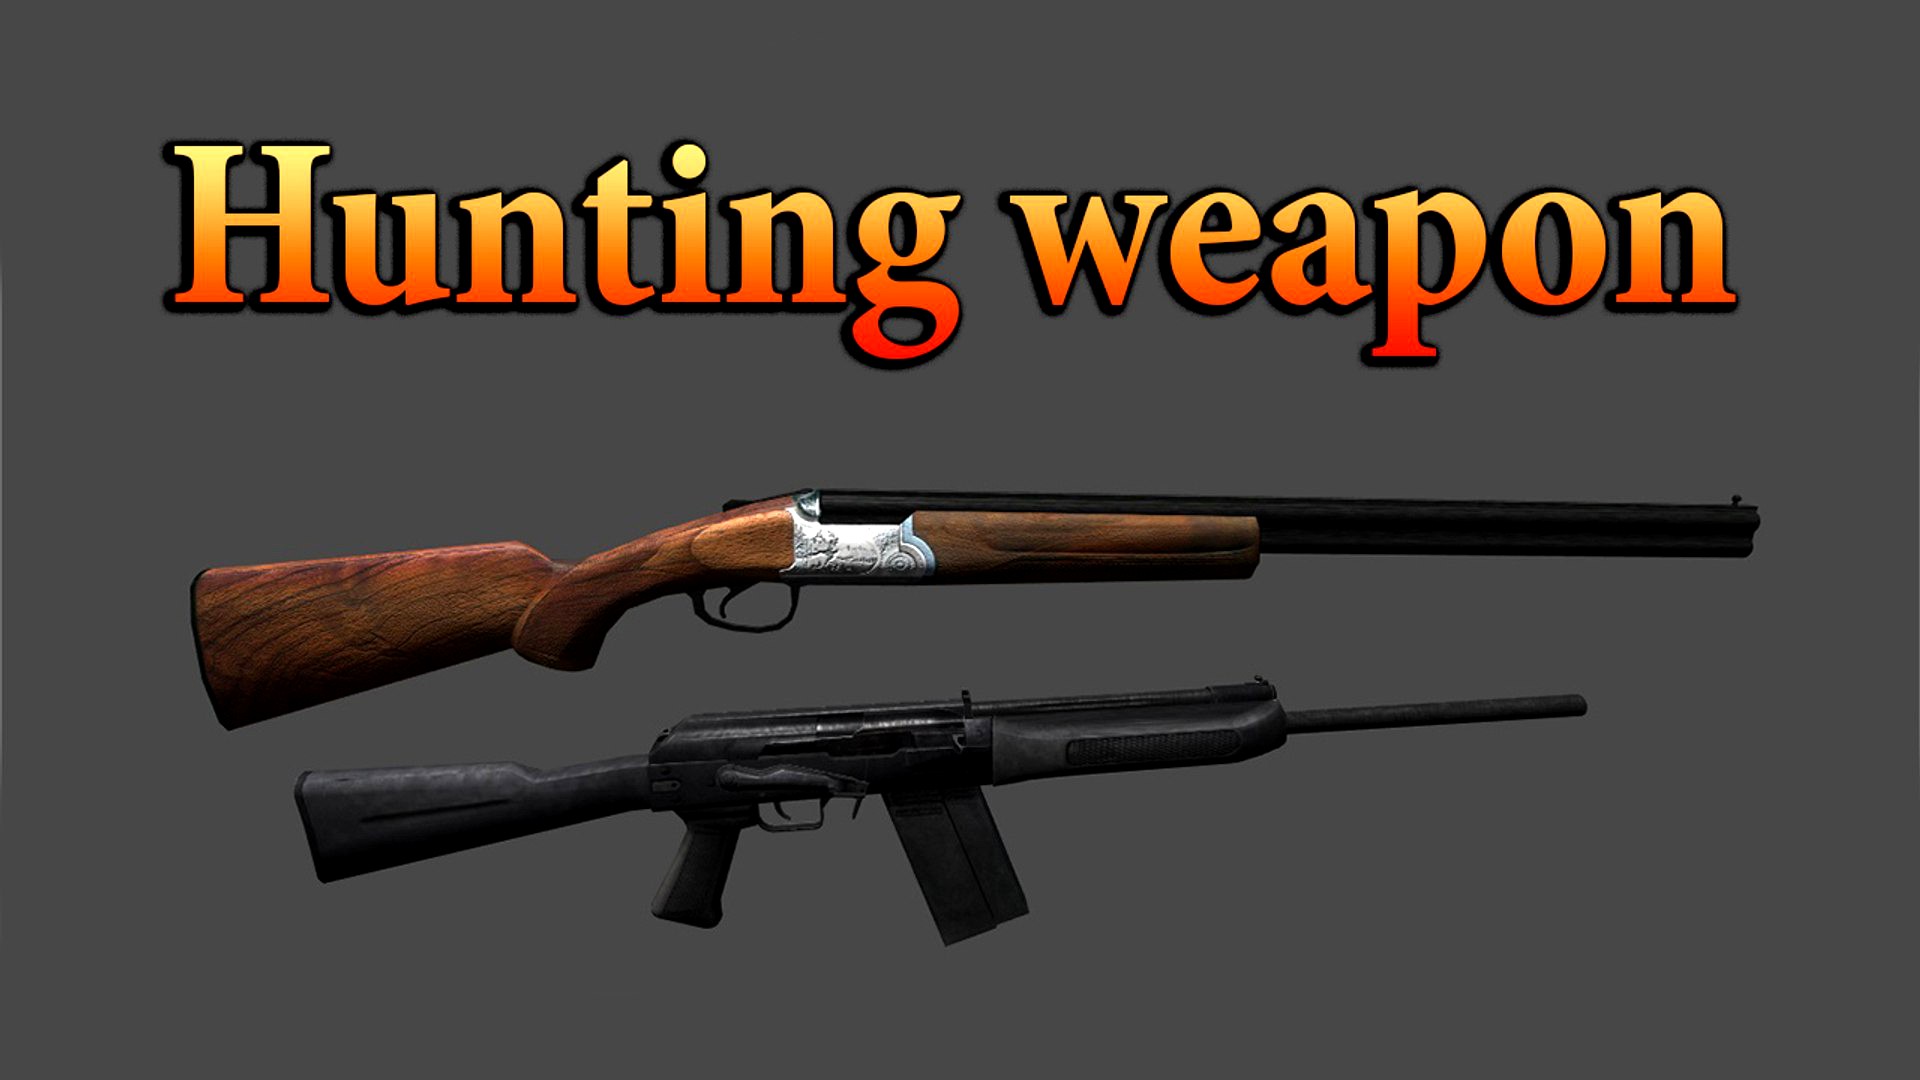 Hunting weapon